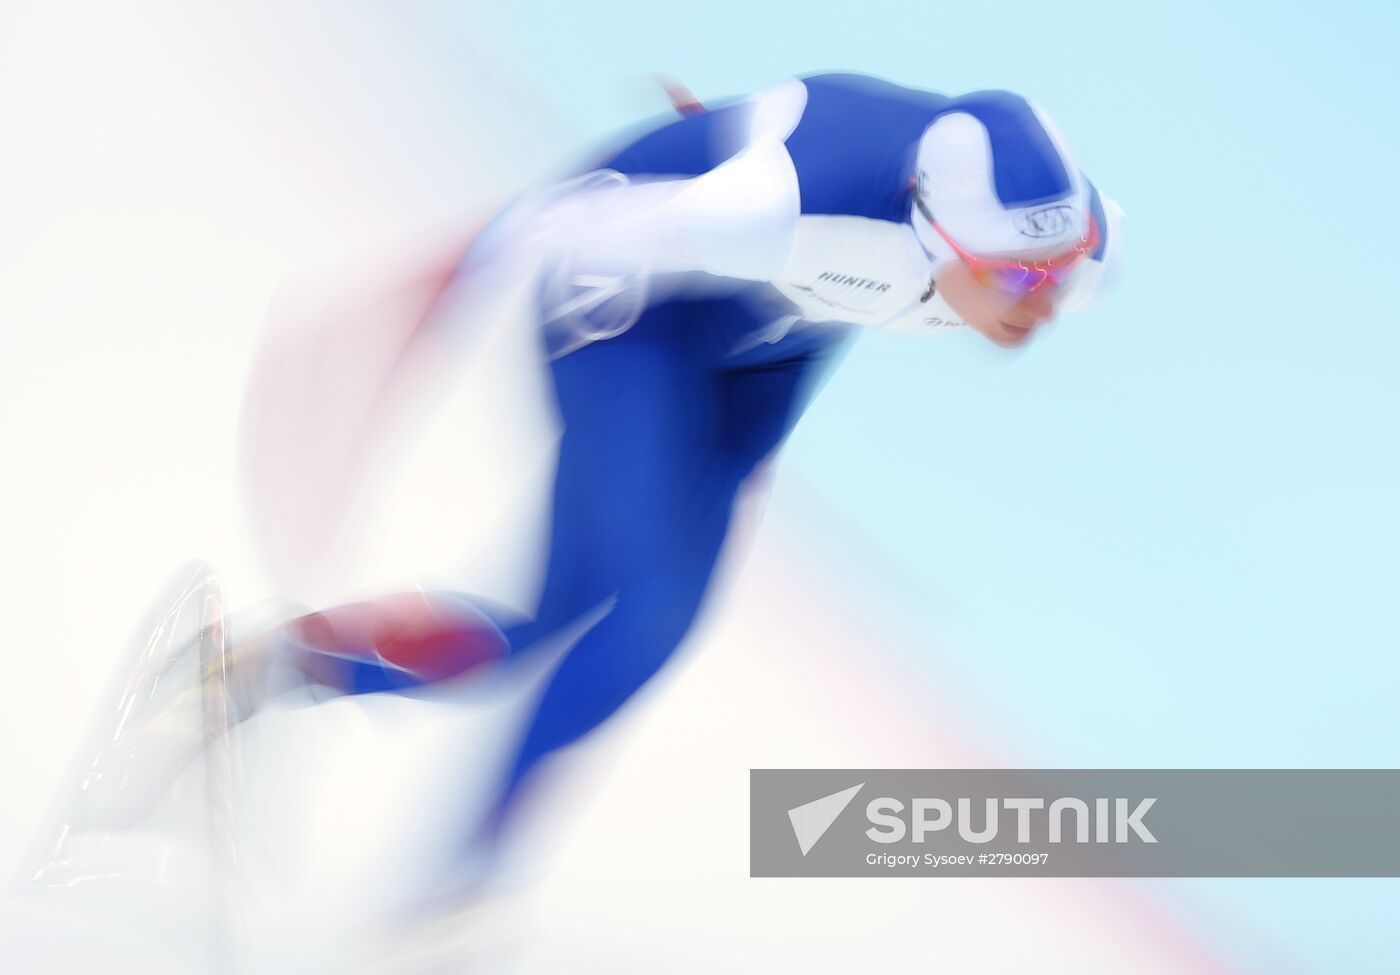 Speed skating. World Single Distance Championships. Day Two